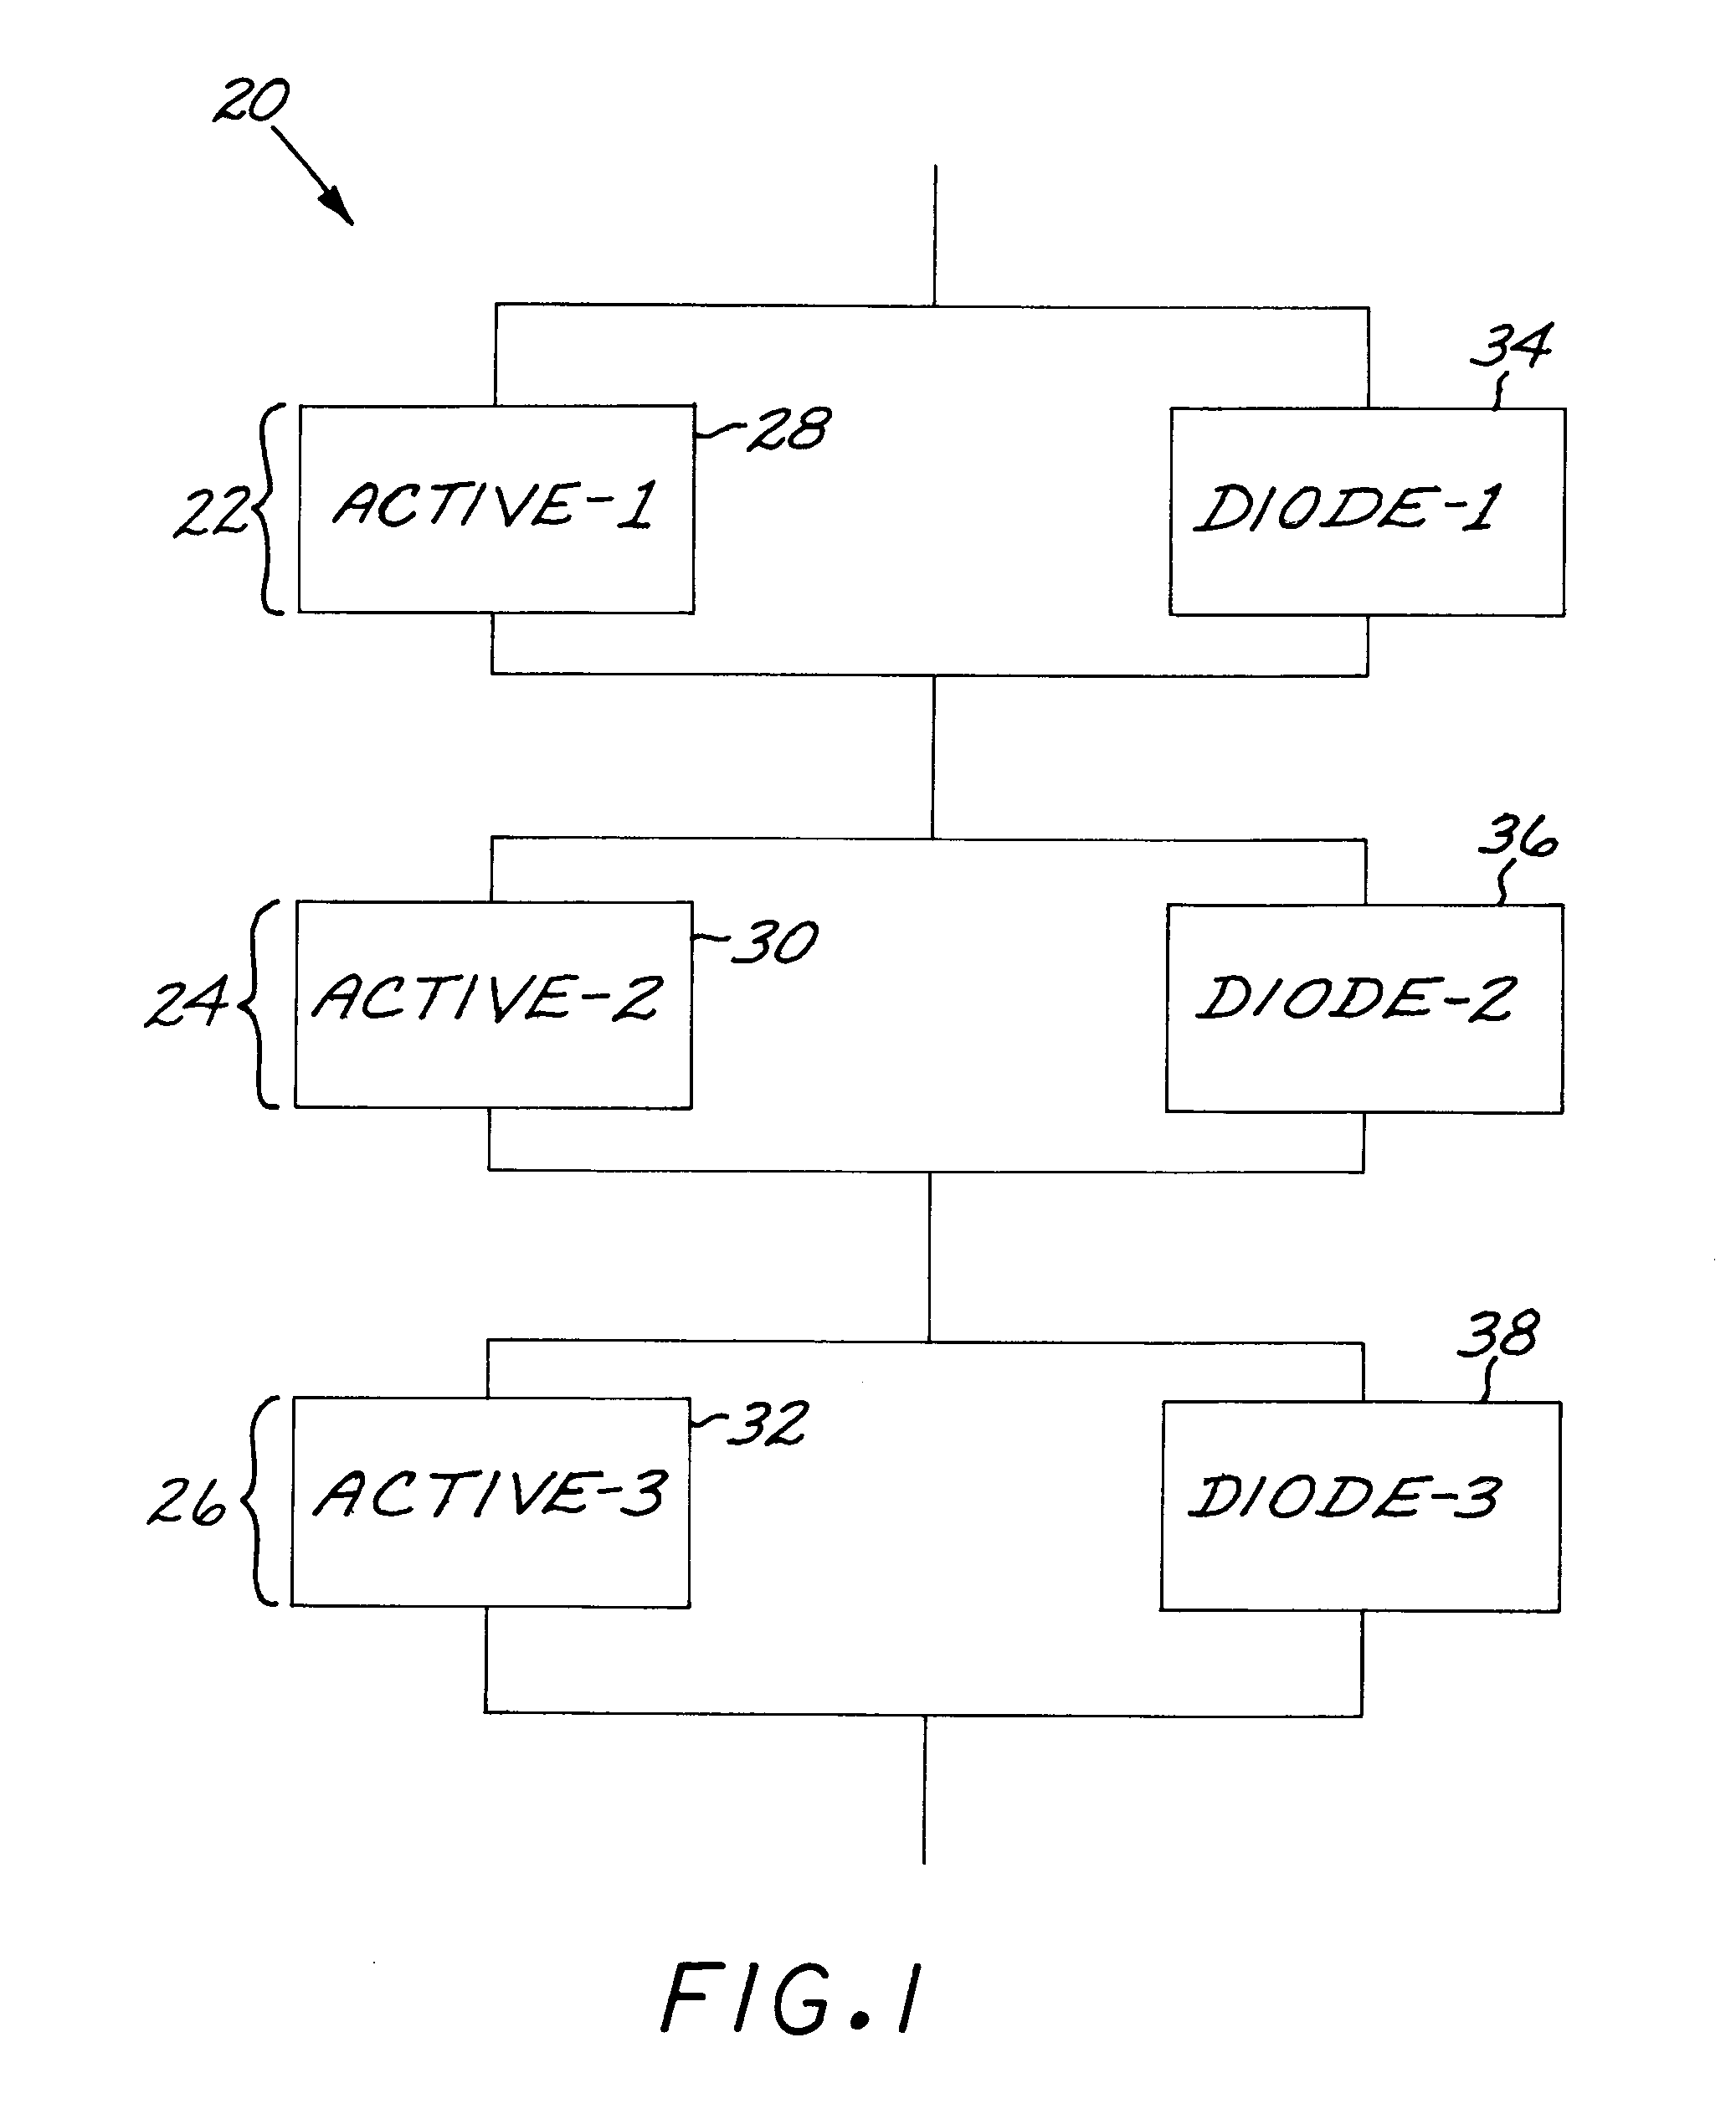 Solar cell array with isotype-heterojunction diode